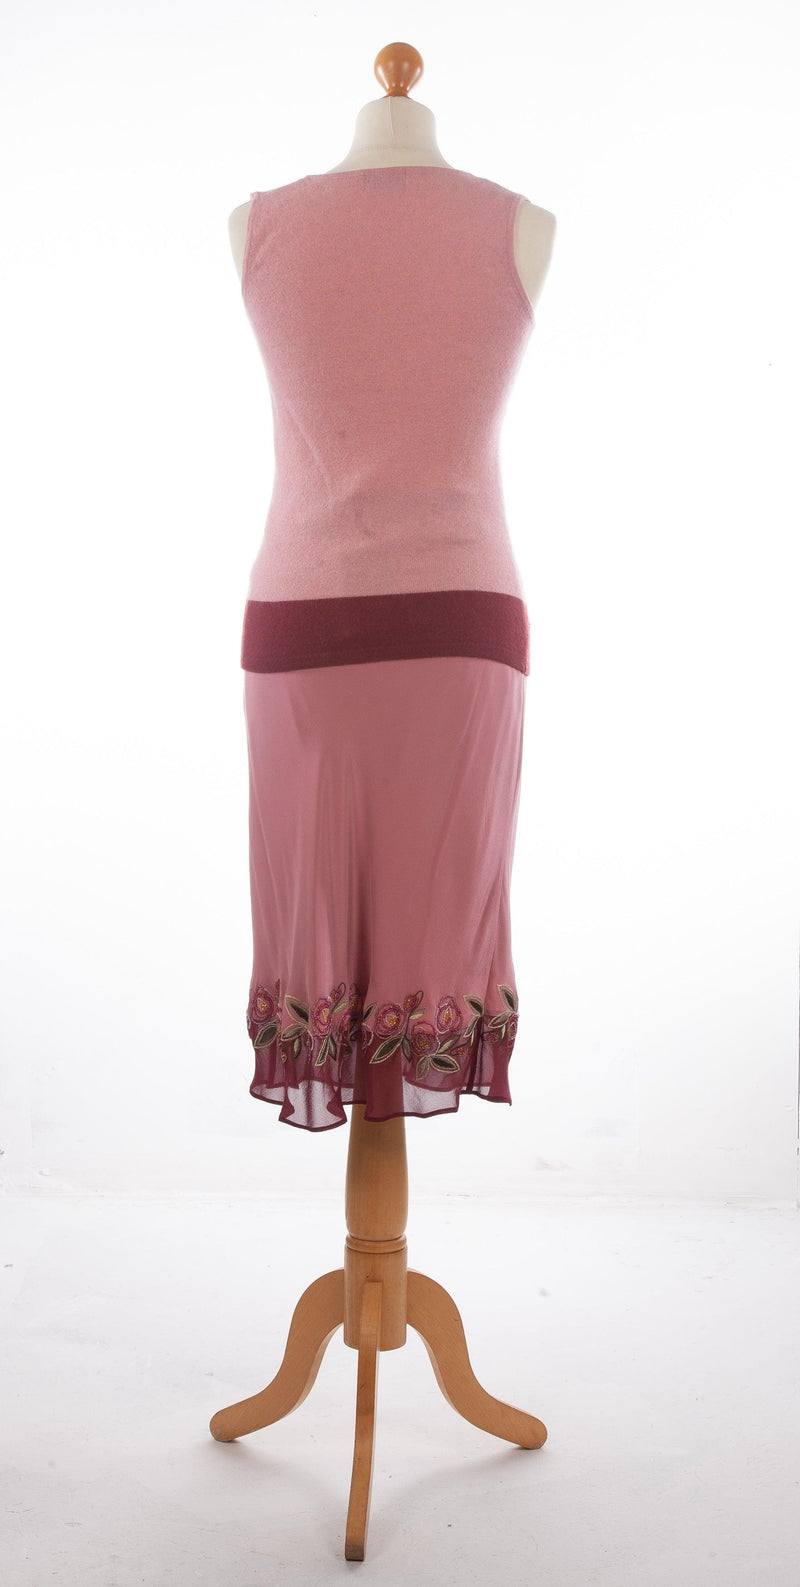 Maria Grachvogel Embellished Skirt with Wool Top Dusky Pink Size S BNWT - Ava & Iva